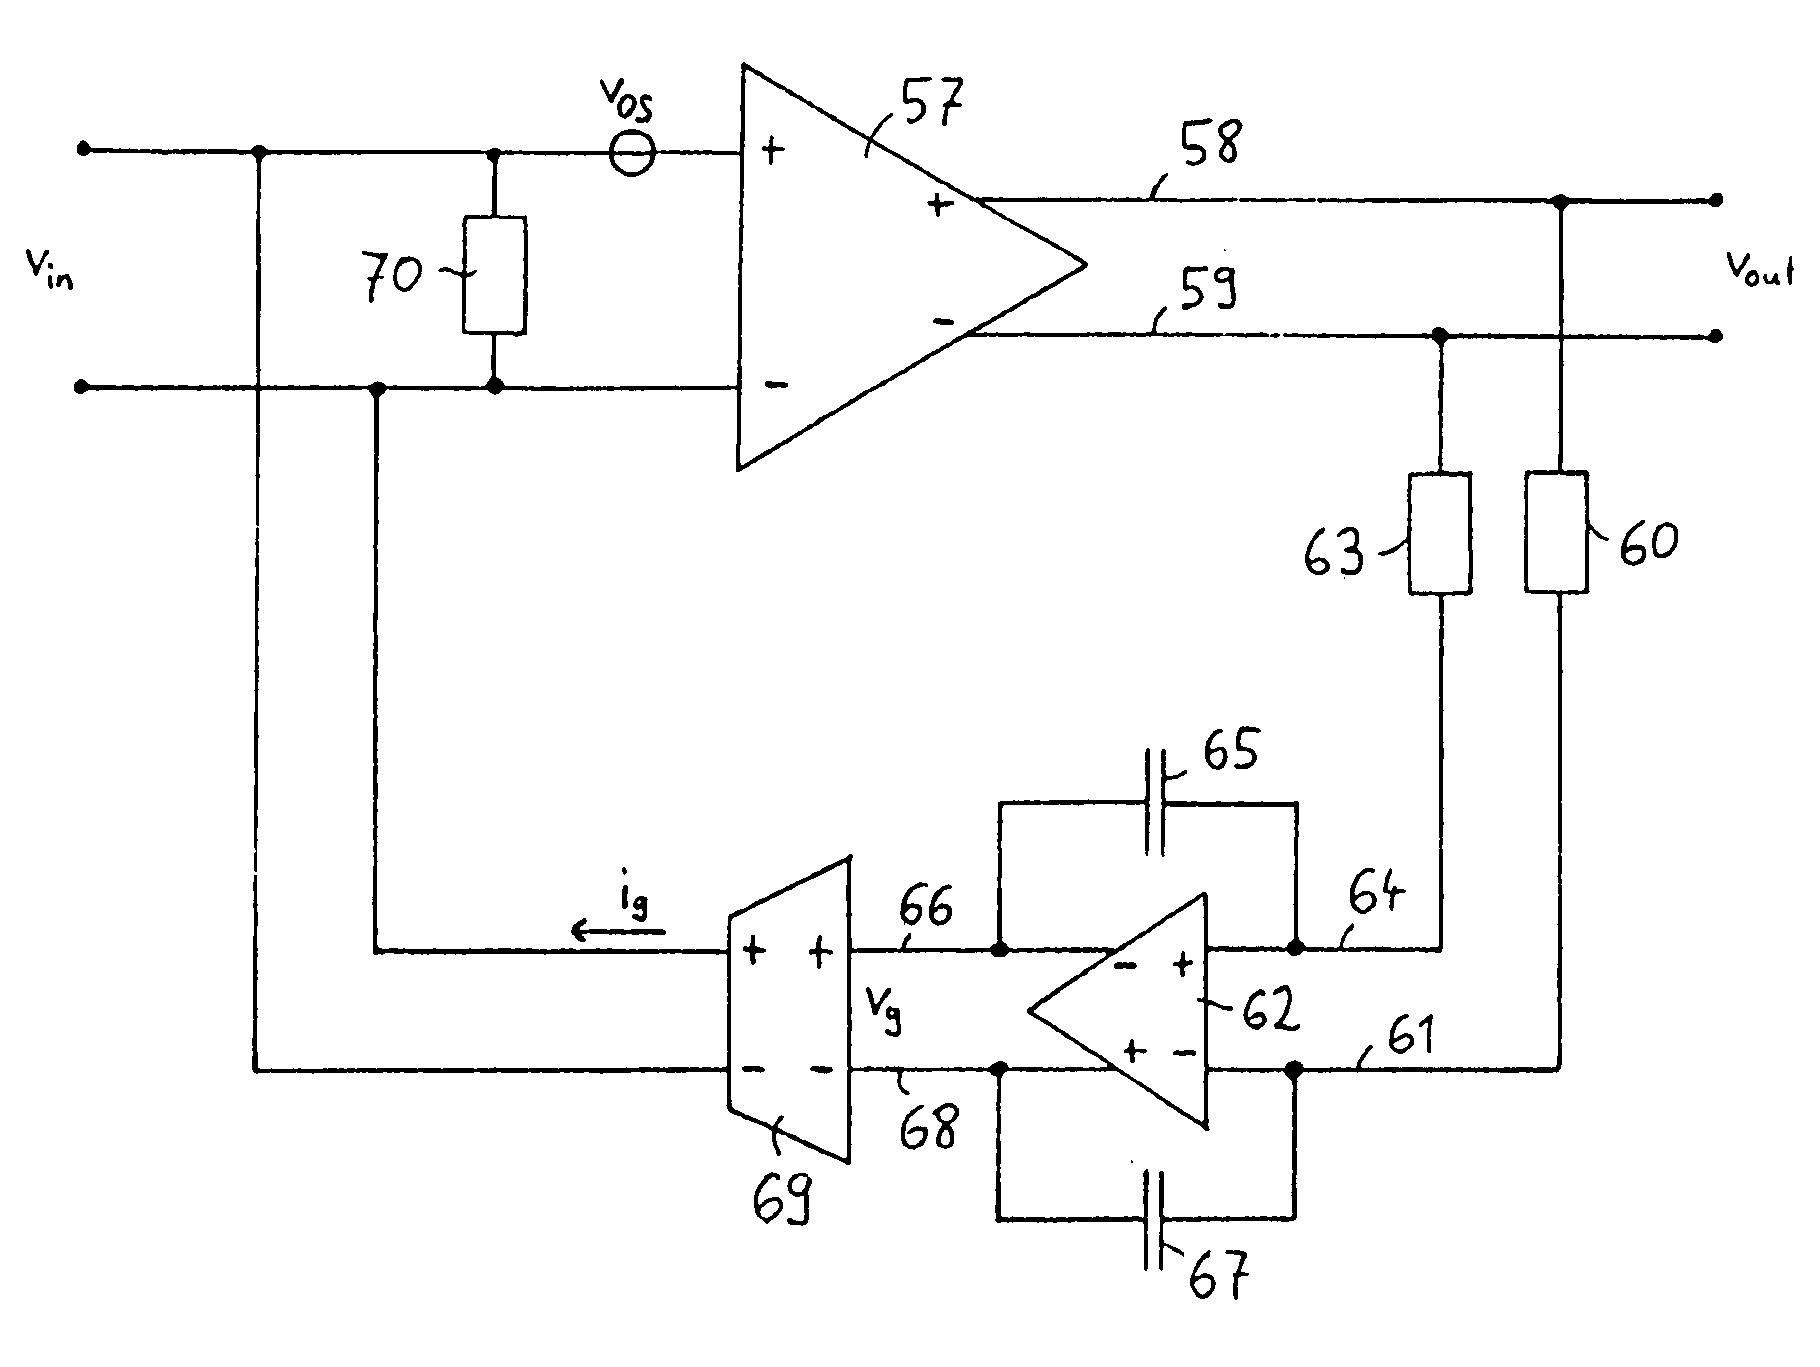 Amplifier with low pass filter feedback